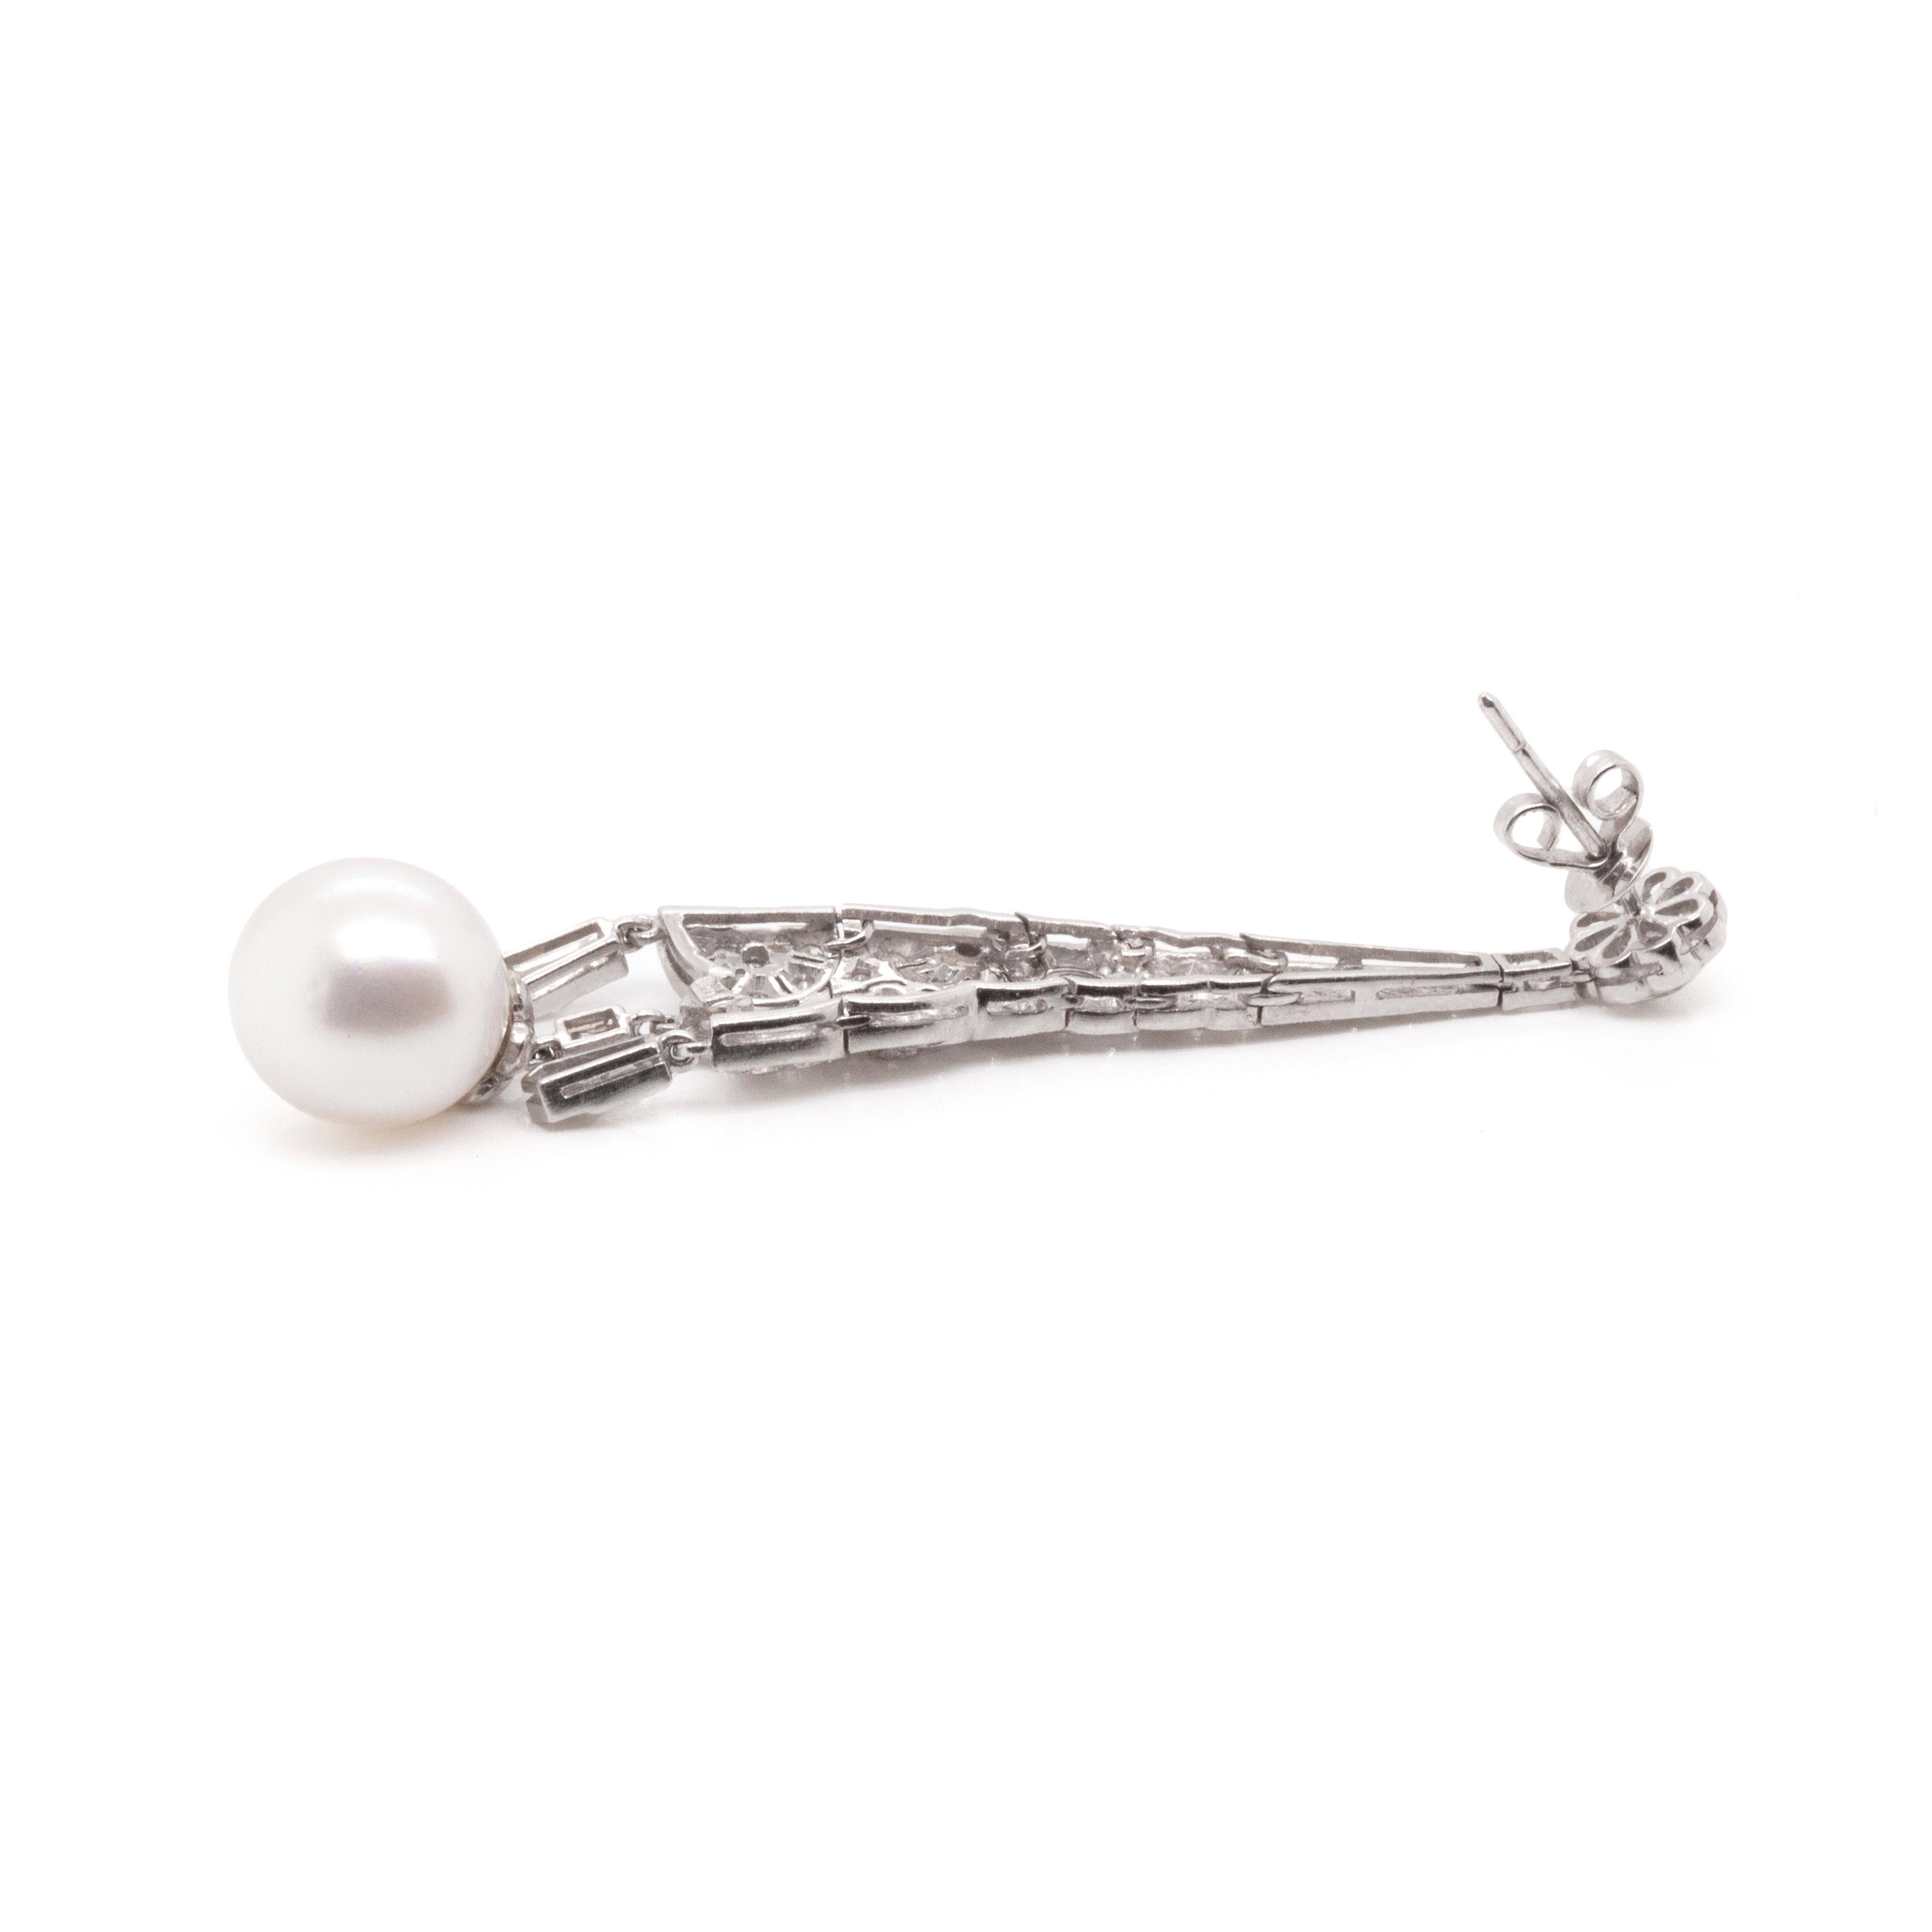 These beautiful 18ct white gold, diamond and pearl drop earrings are the perfect statement piece for any special occasion.

Falling an incredible 7cm, these gorgeous earrings are set with an estimated three carats of fine quality round brilliant cut